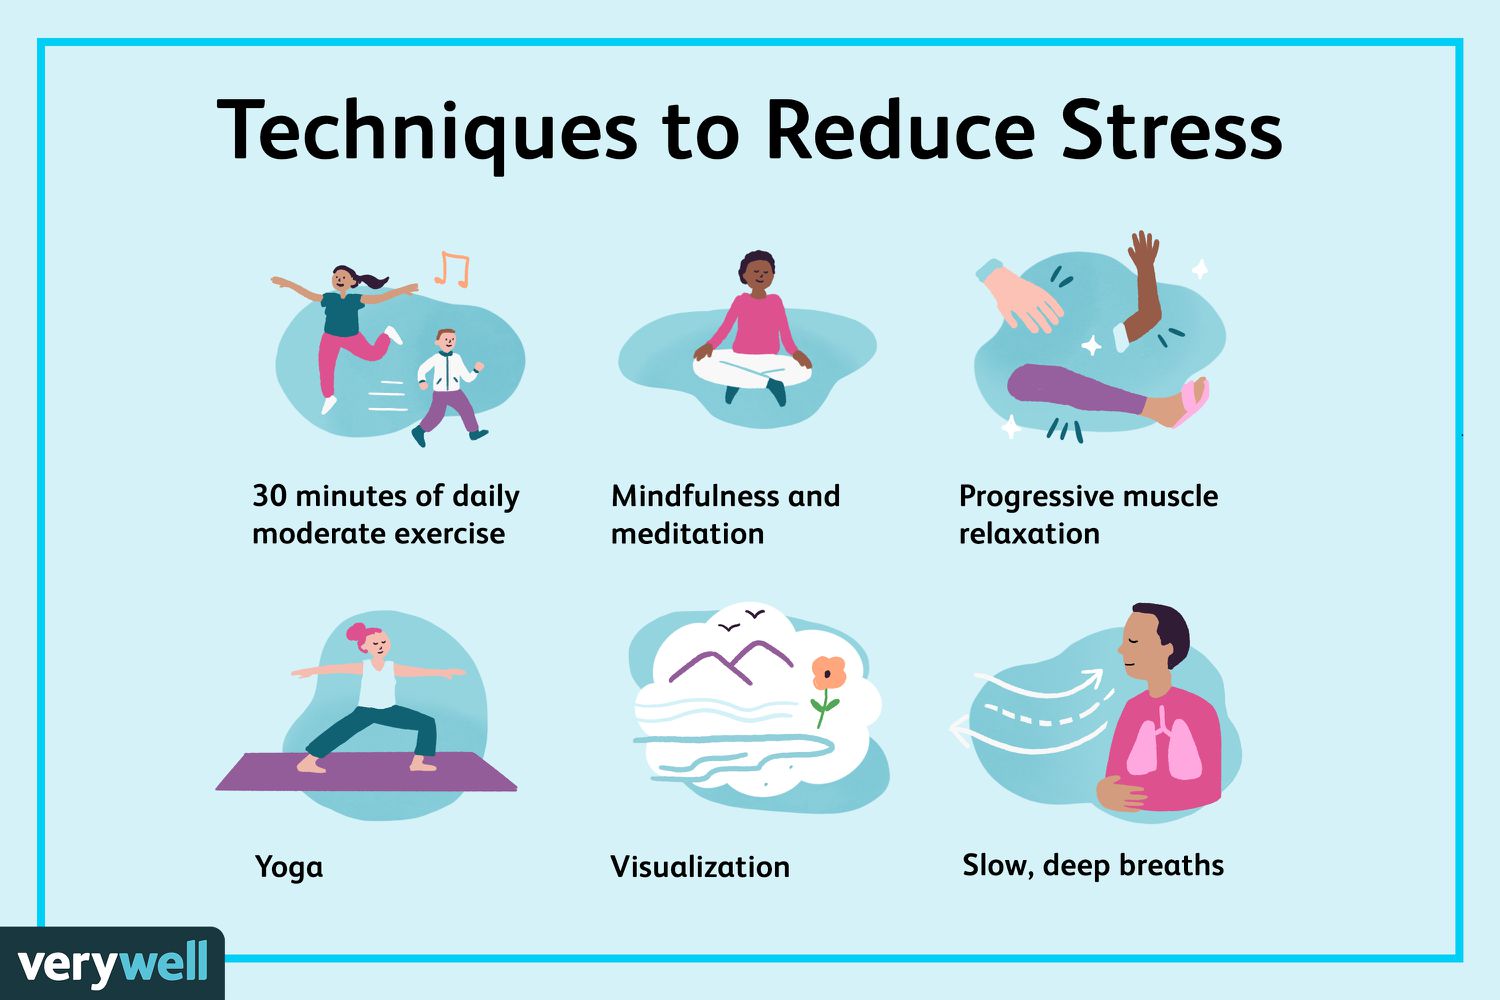 What are the best relaxation techniques for stress reduction?